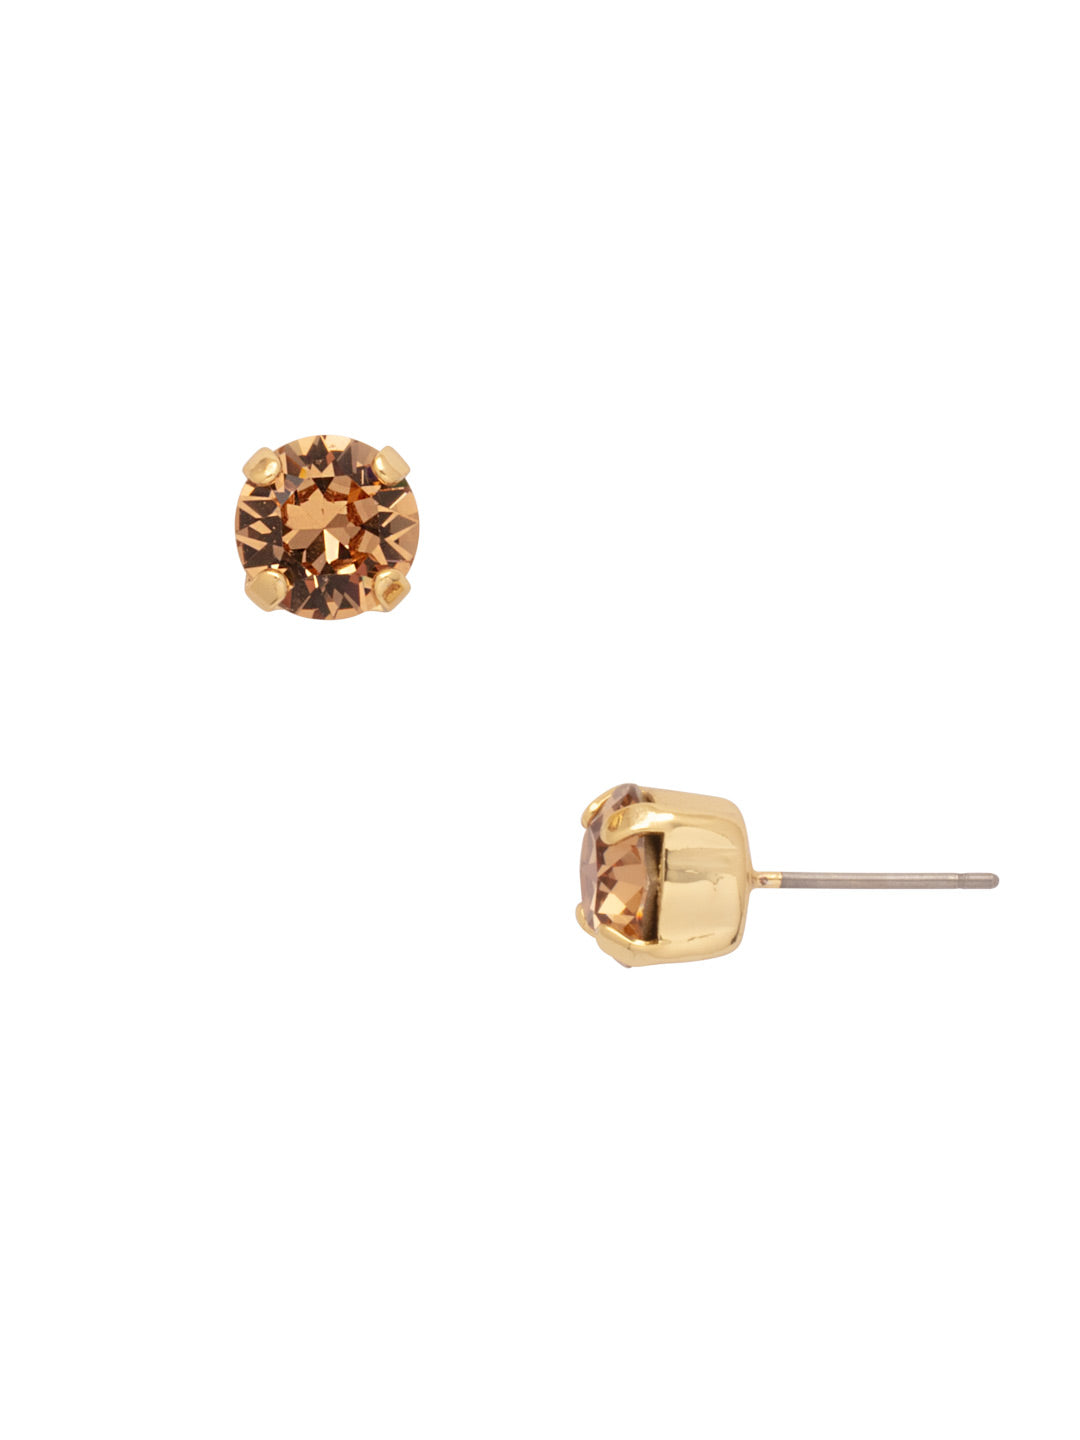 Simple Stud Earrings - EFC99BGLC - <p>The Simple Stud Earrings feature a single solid crystal on a surgical steel post, creating a small but sparkly everyday staple! Need help picking a stud? <a href="https://www.sorrelli.com/blogs/sisterhood/round-stud-earrings-101-a-rundown-of-sizes-styles-and-sparkle">Check out our size guide!</a> From Sorrelli's Light Colorado collection in our Bright Gold-tone finish.</p>